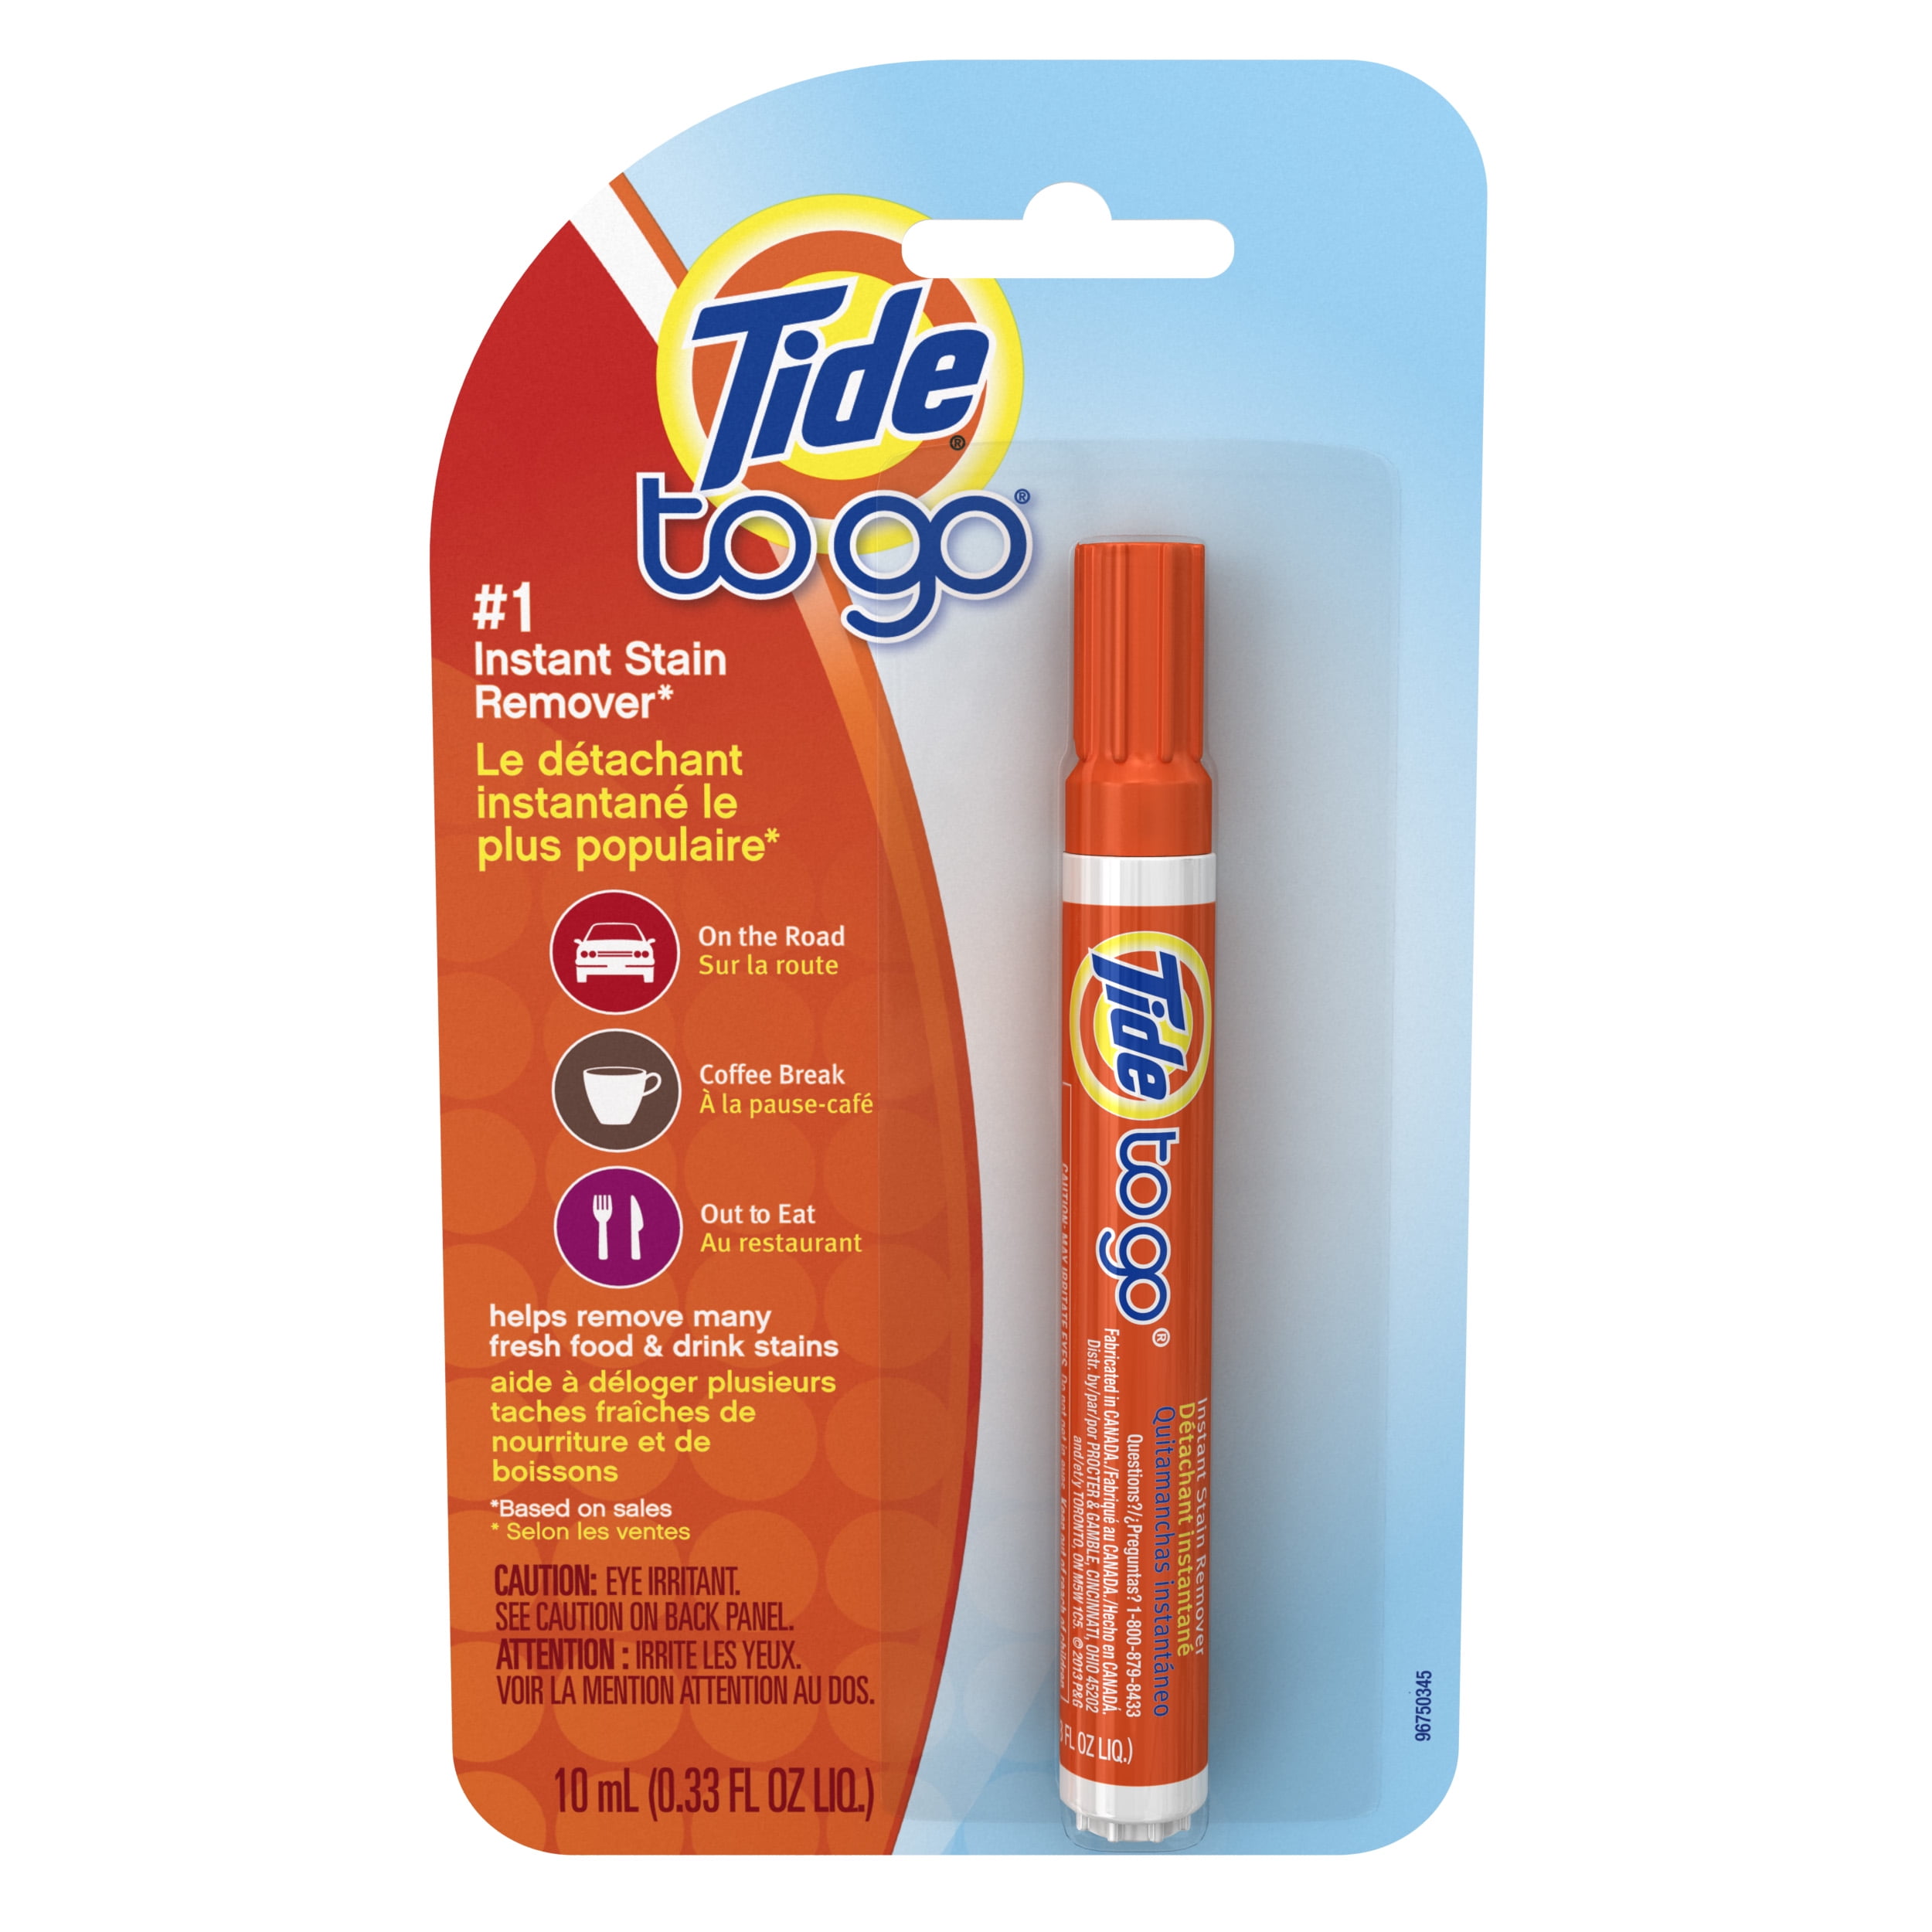 Details about   Tide Go Pen Instant Stain Remover Pen 3 pack New 